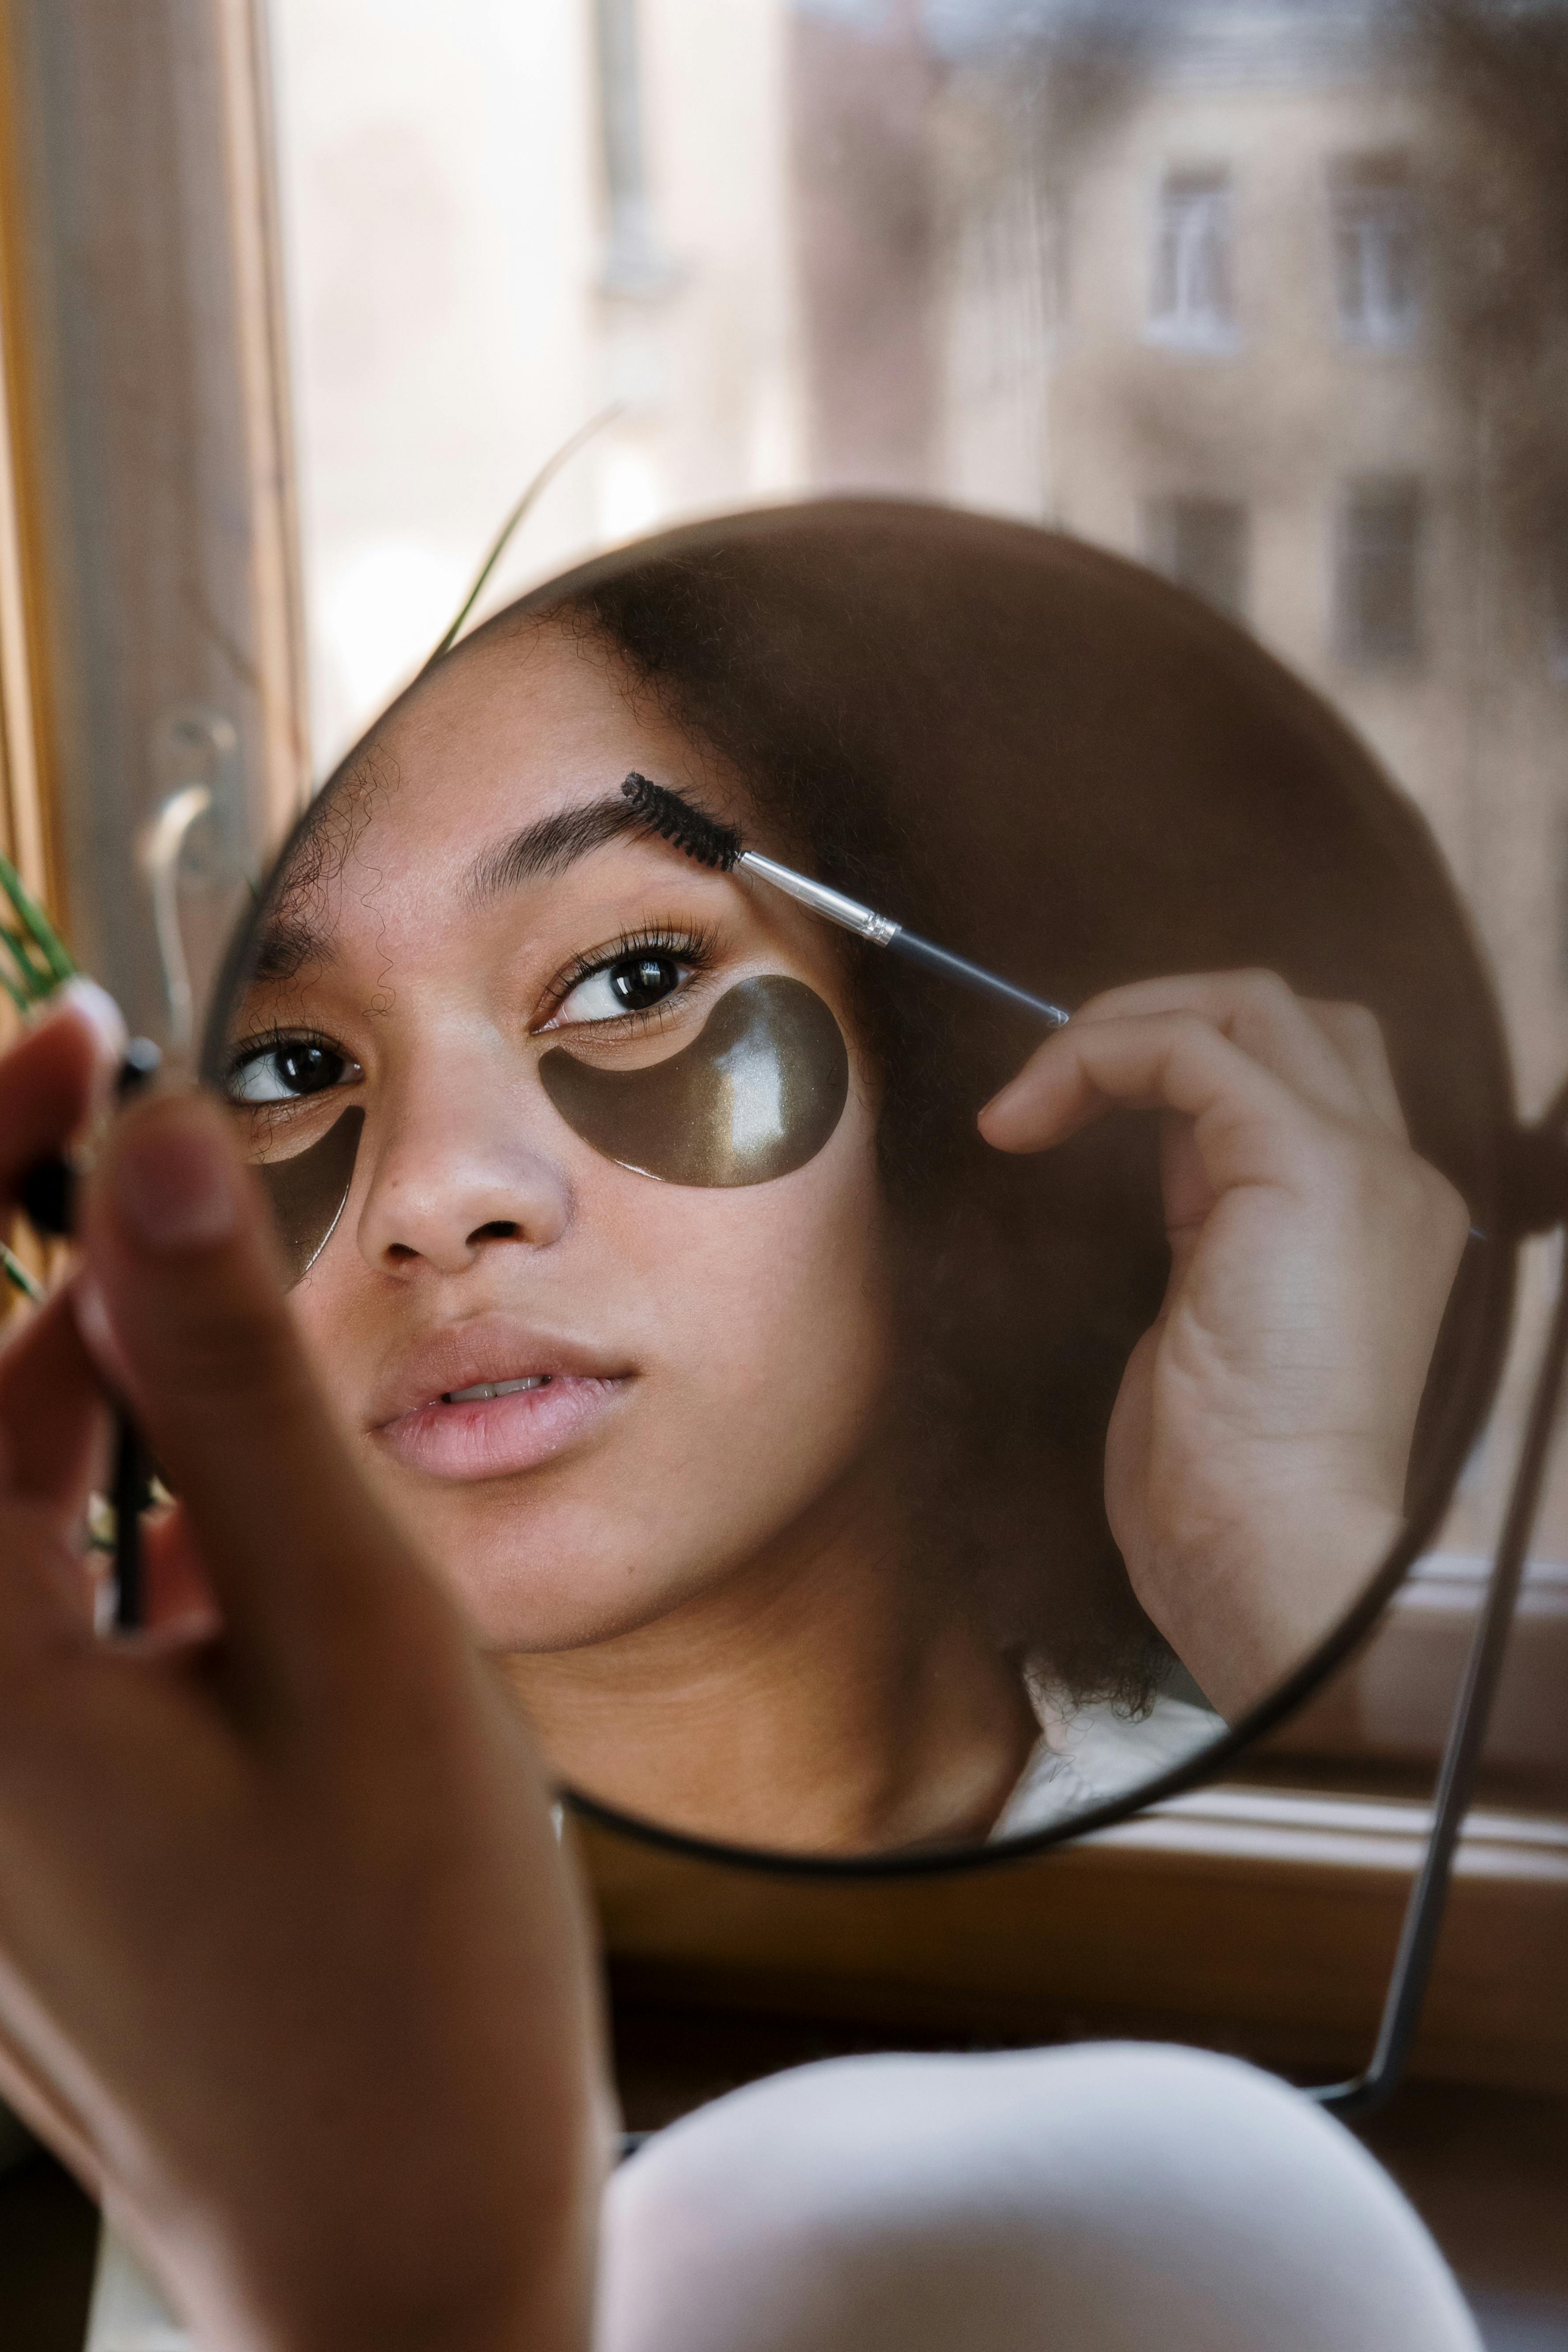 What are the benefits of illuminated makeup mirrors?